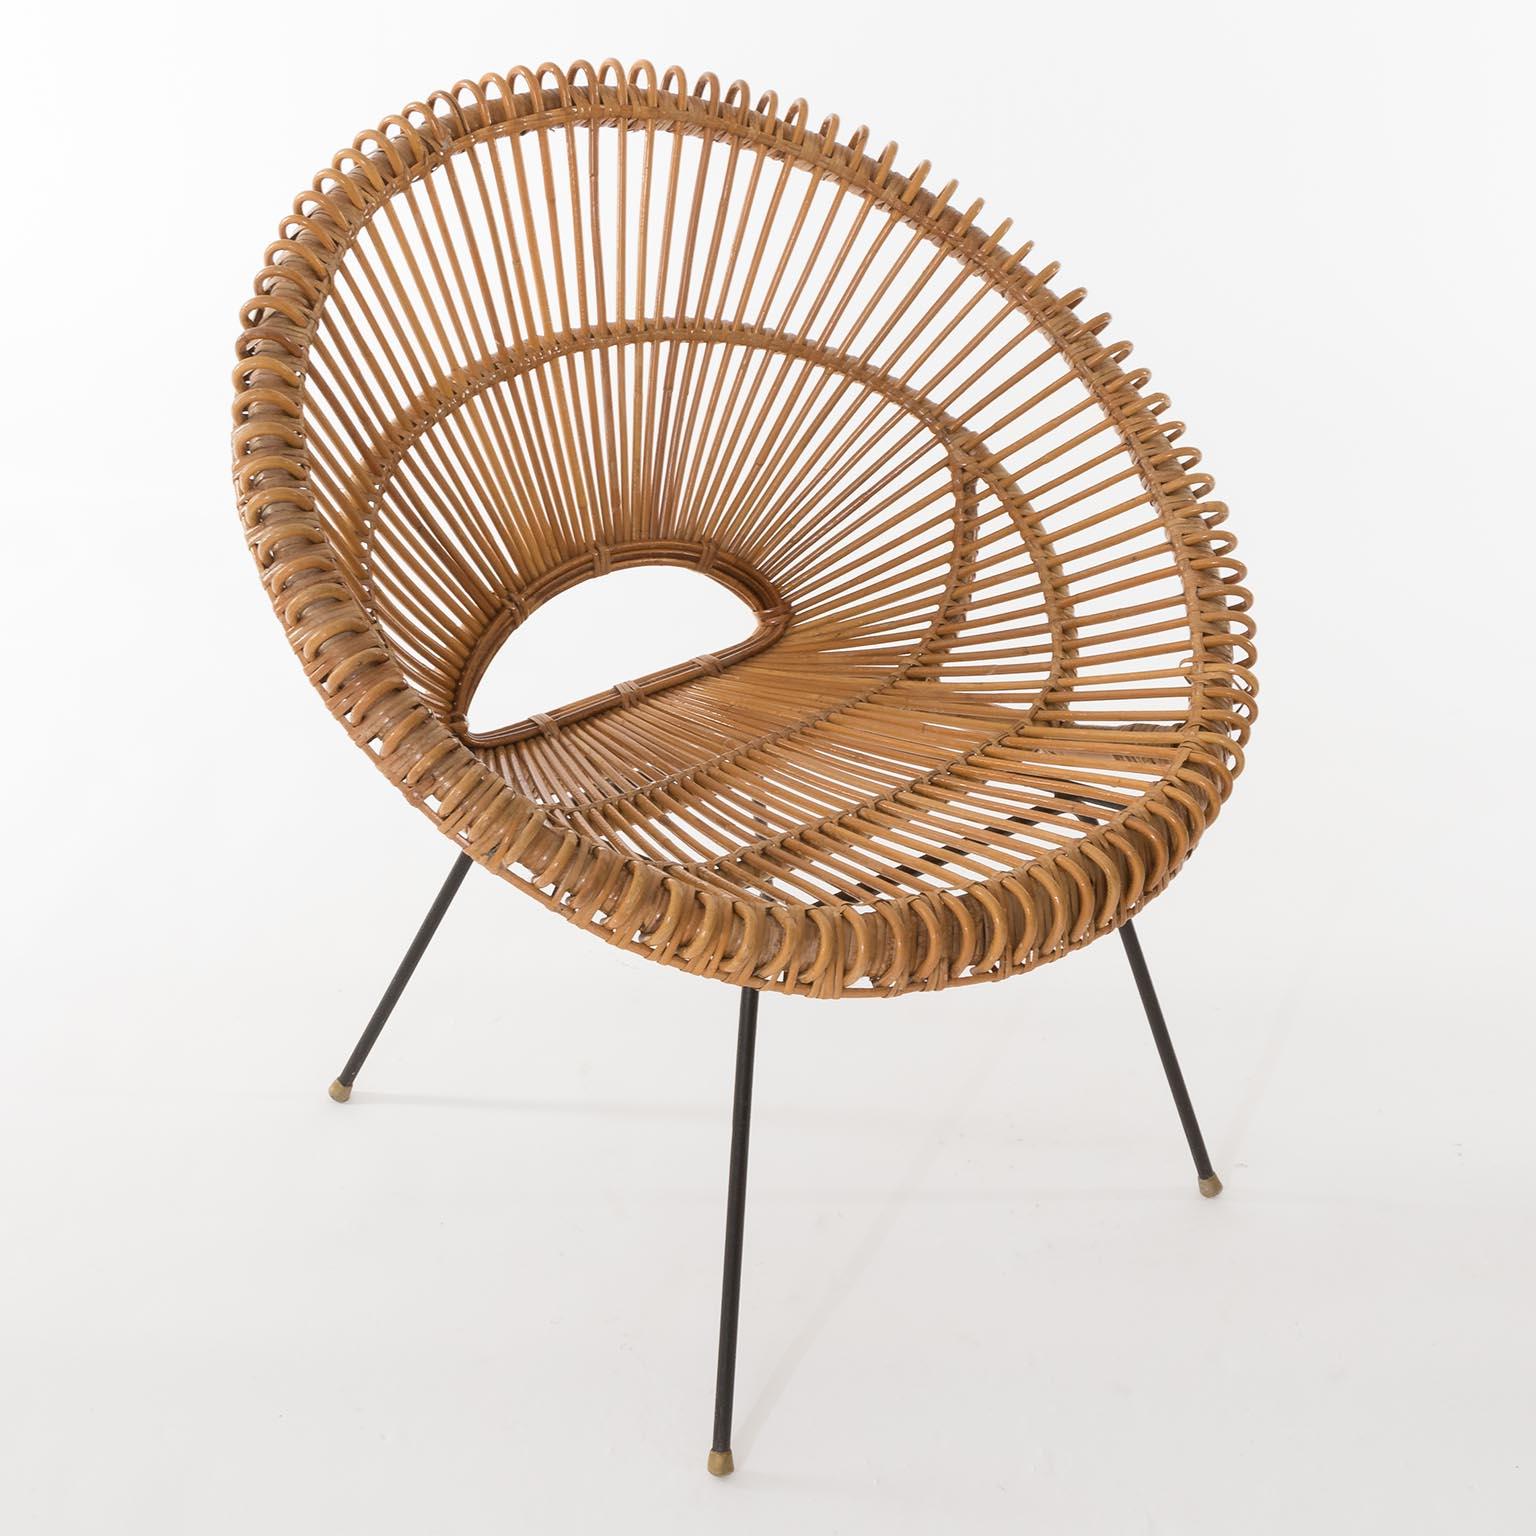 Set Four Mid-Century Modern Rattan Bamboo Chairs, Janine Abraham, Dirk Rol, 1960 For Sale 2